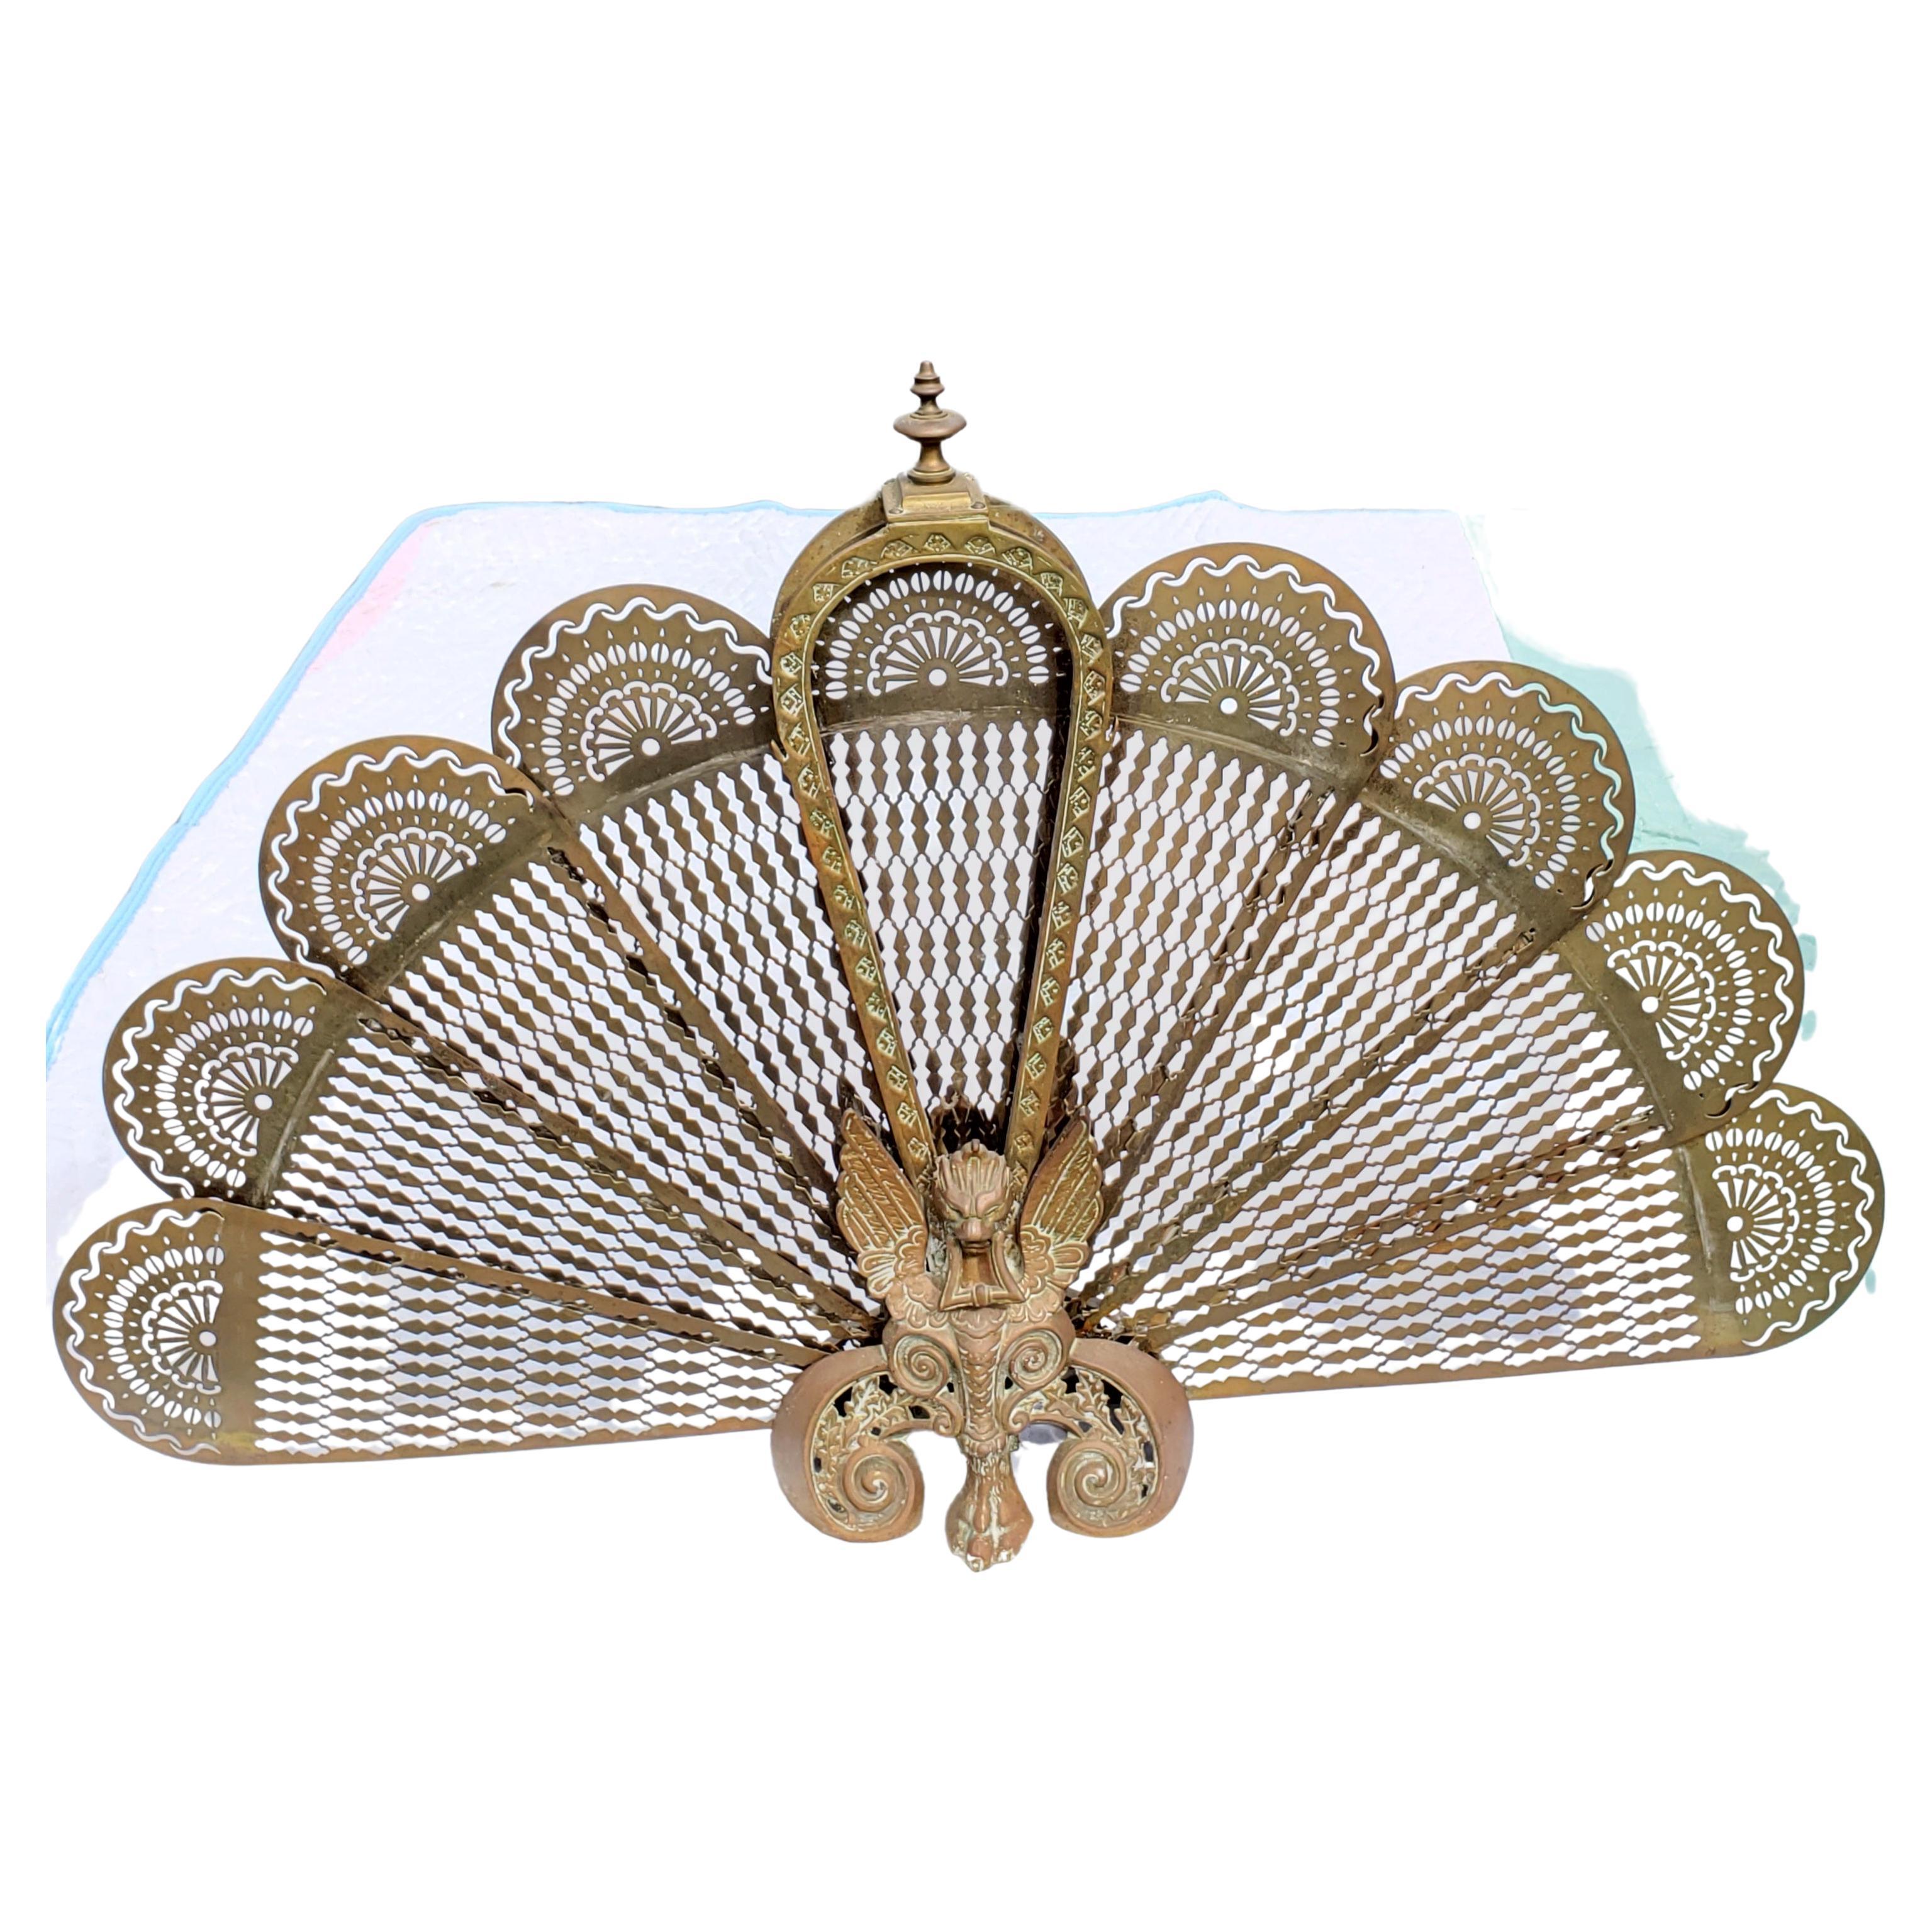 Antique Fan Fireplace Screen, Brass Peacock Fireplace Screen from France.
Good vintage condition with wear consistent with age and use
Measures 40.5